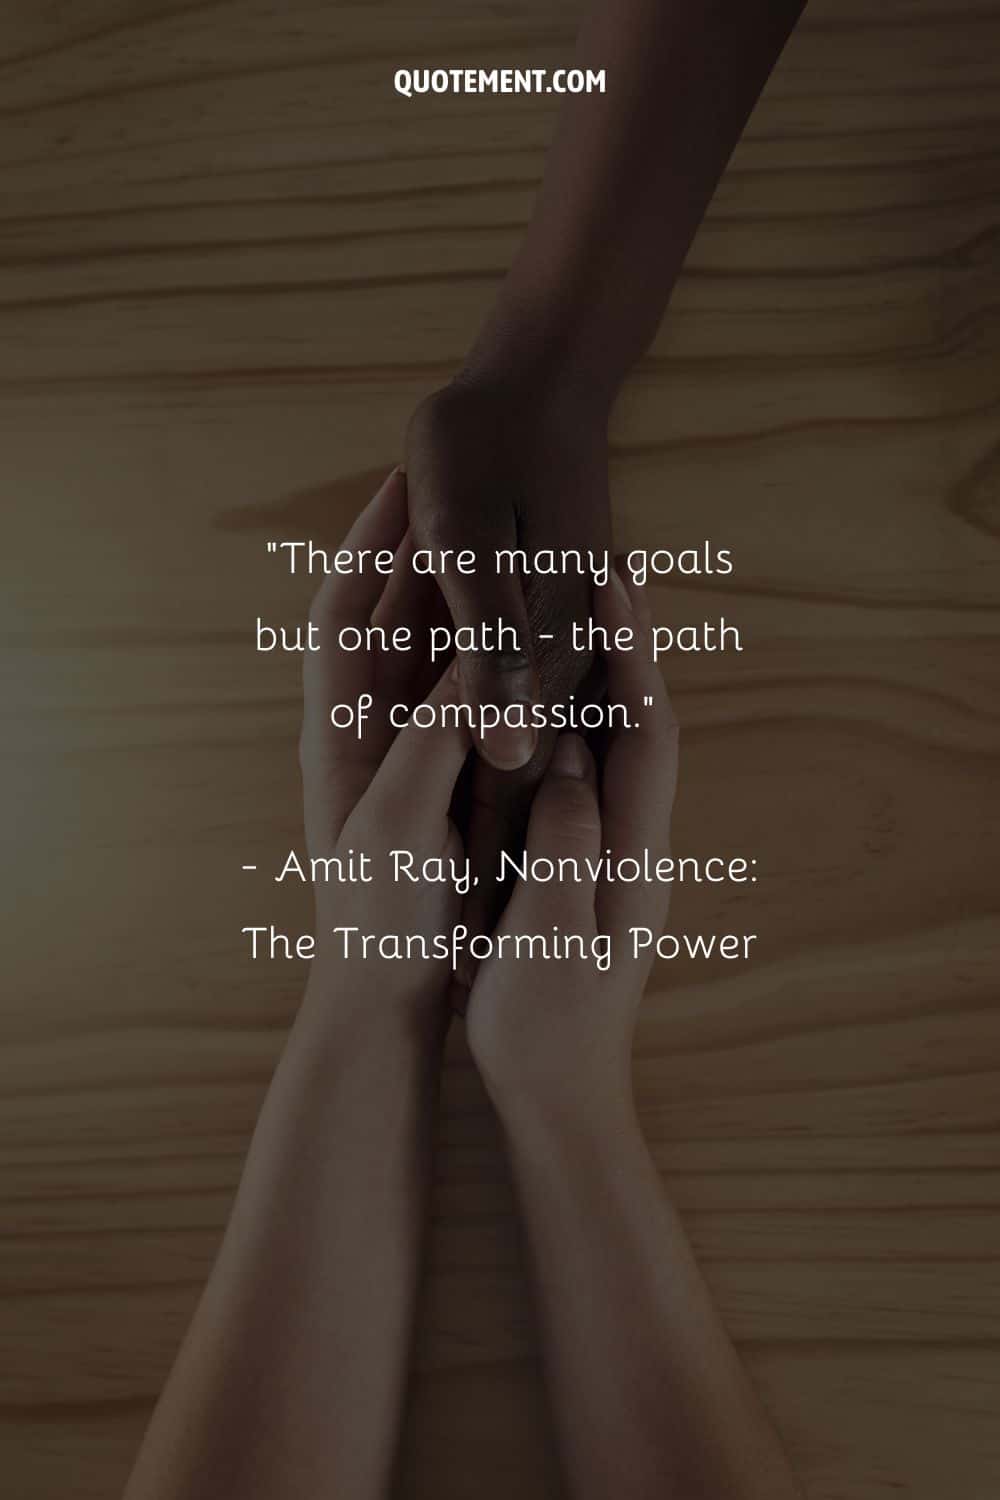 There are many goals but one path - the path of compassion.